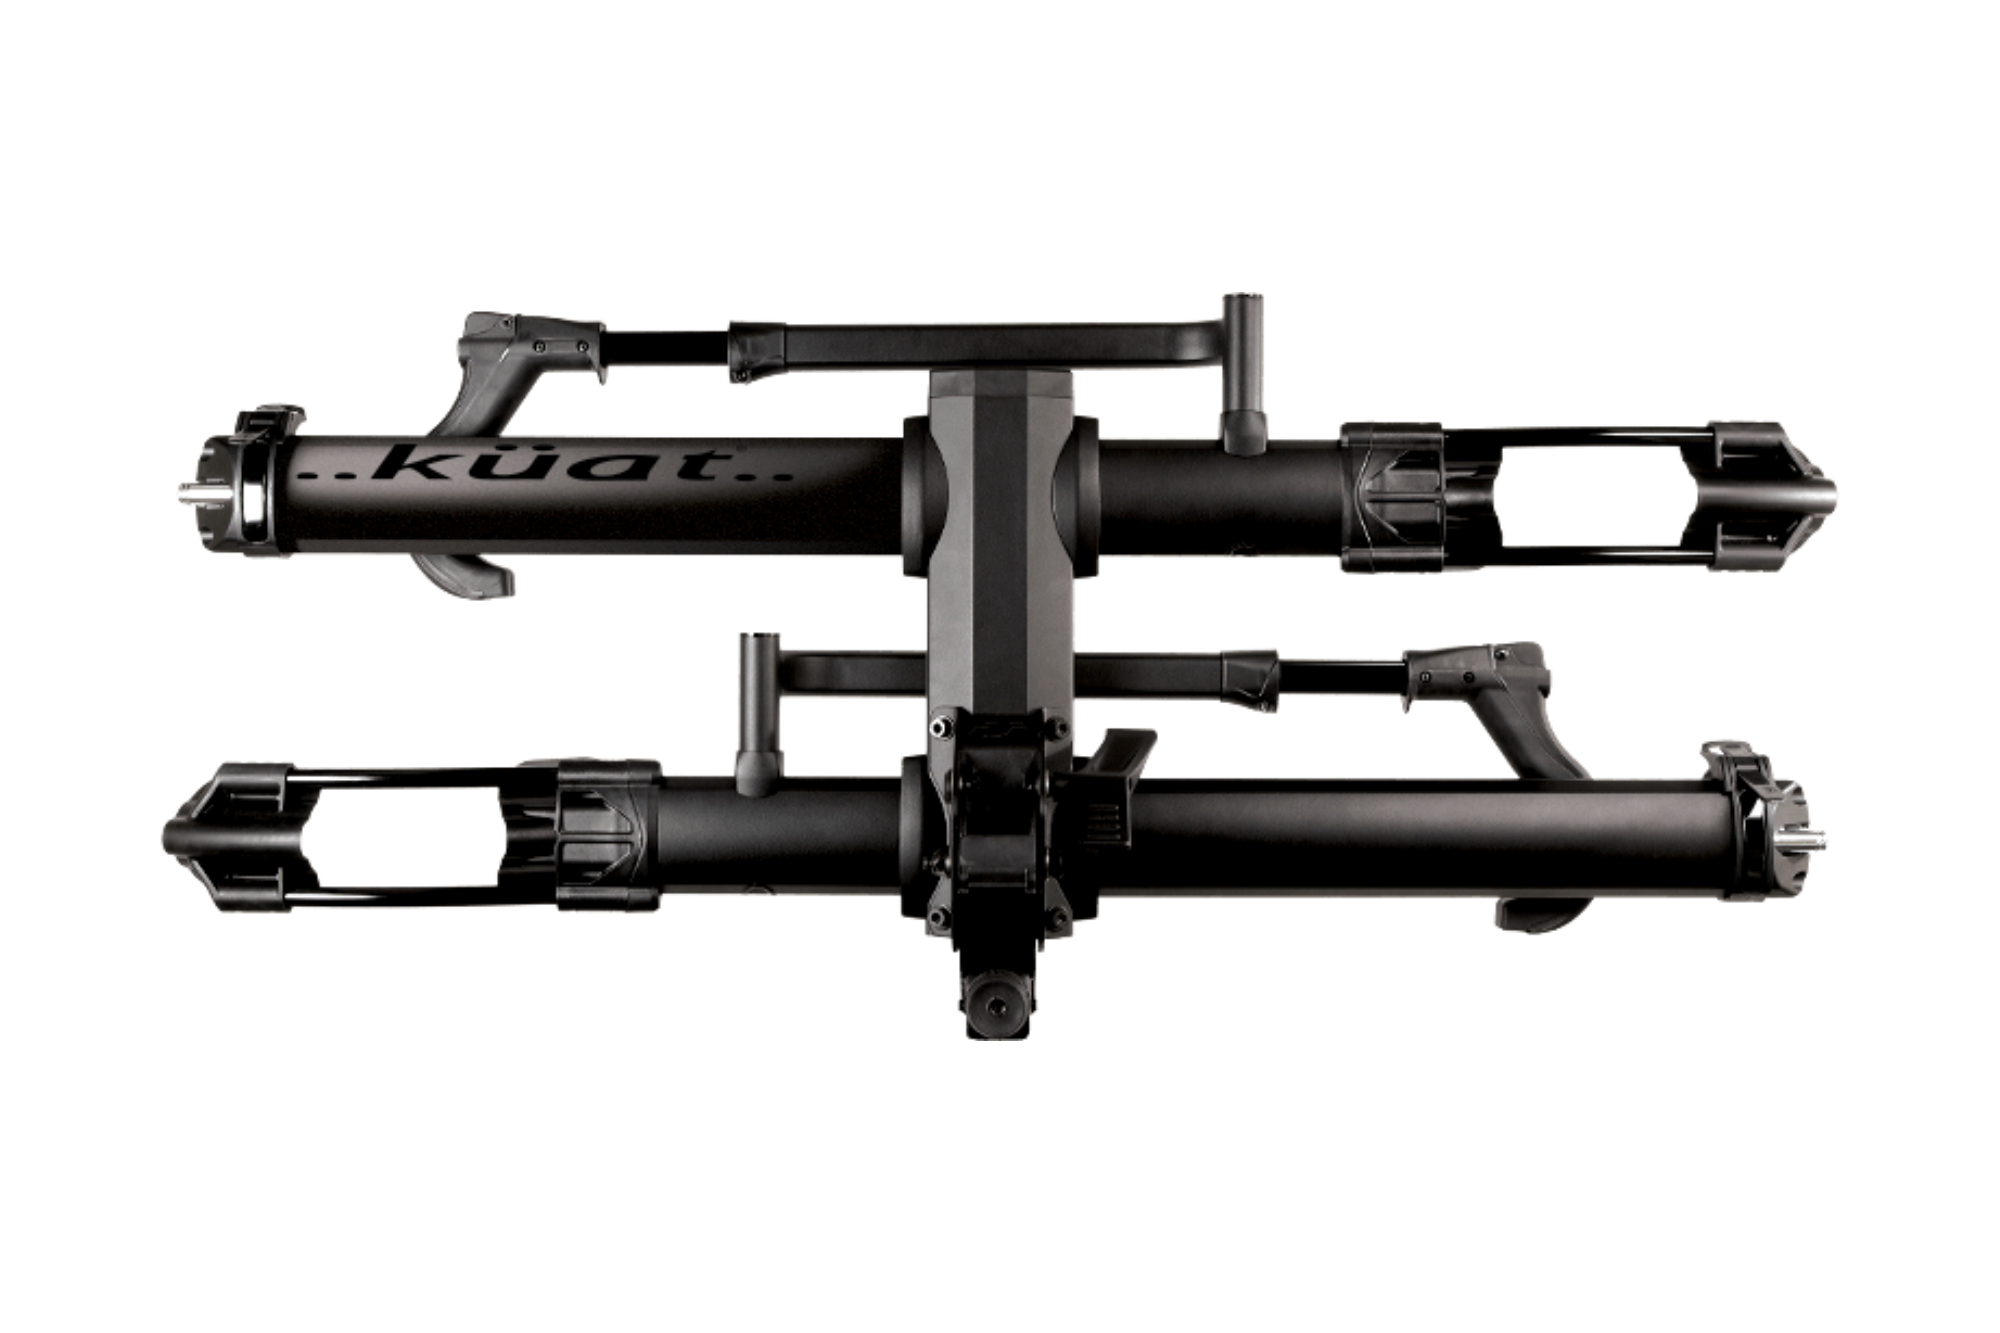 KUAT bike racks are built to secure, protect and support your most prized possessions.